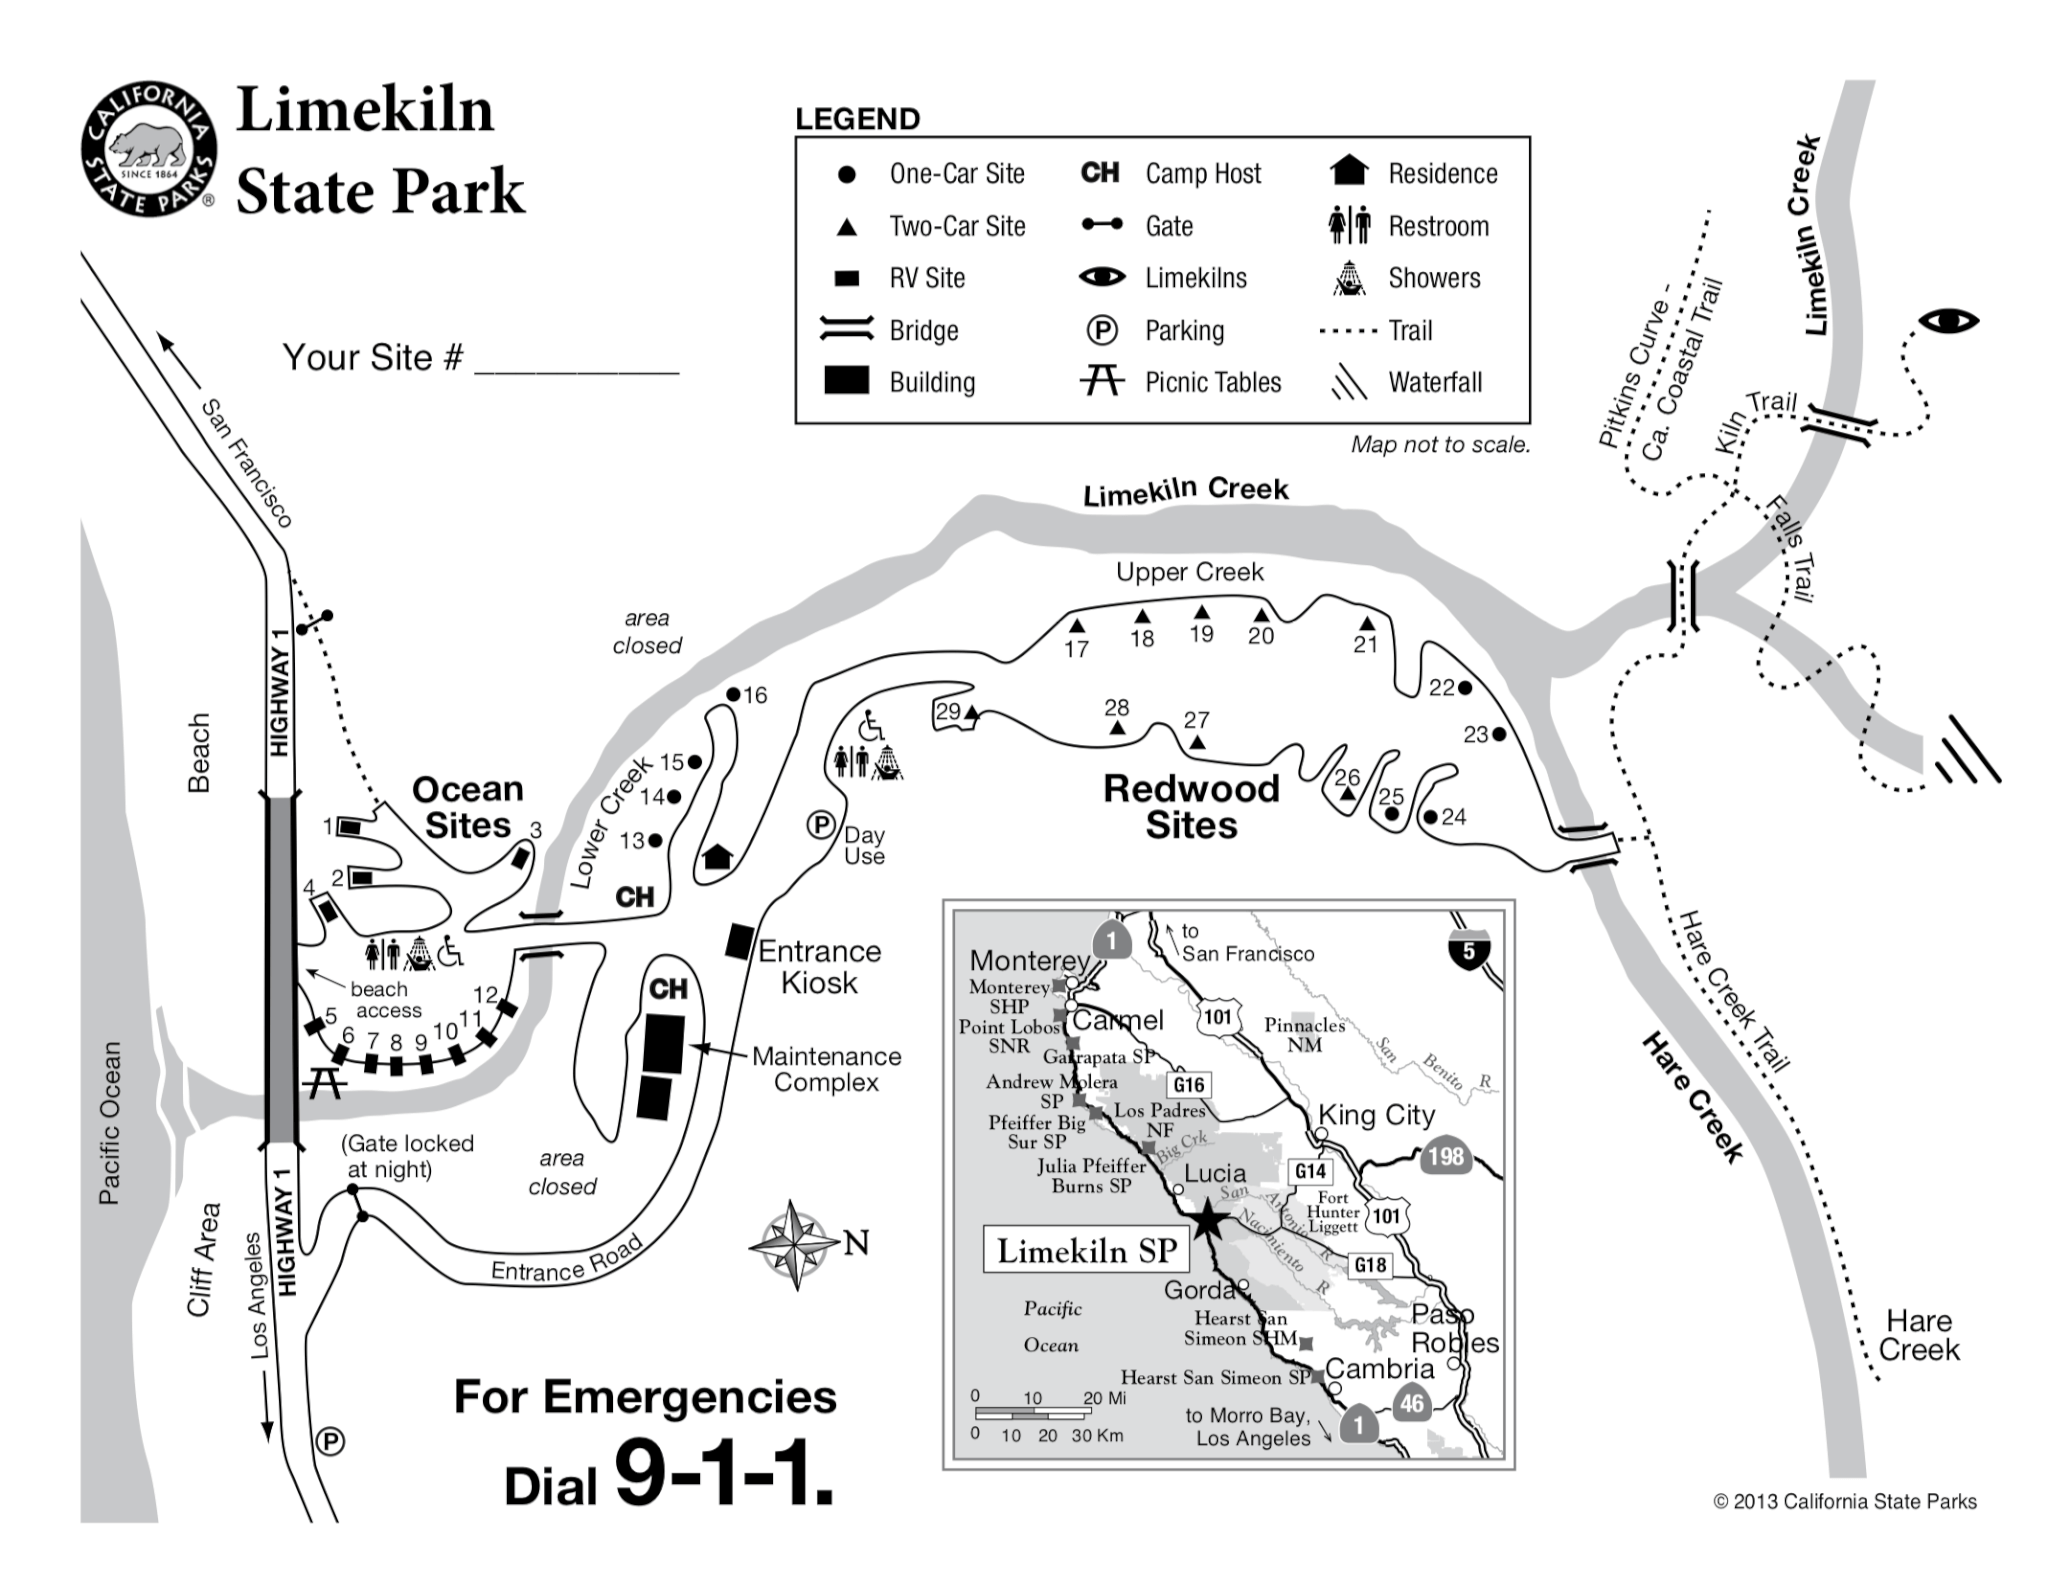 Campground Map.